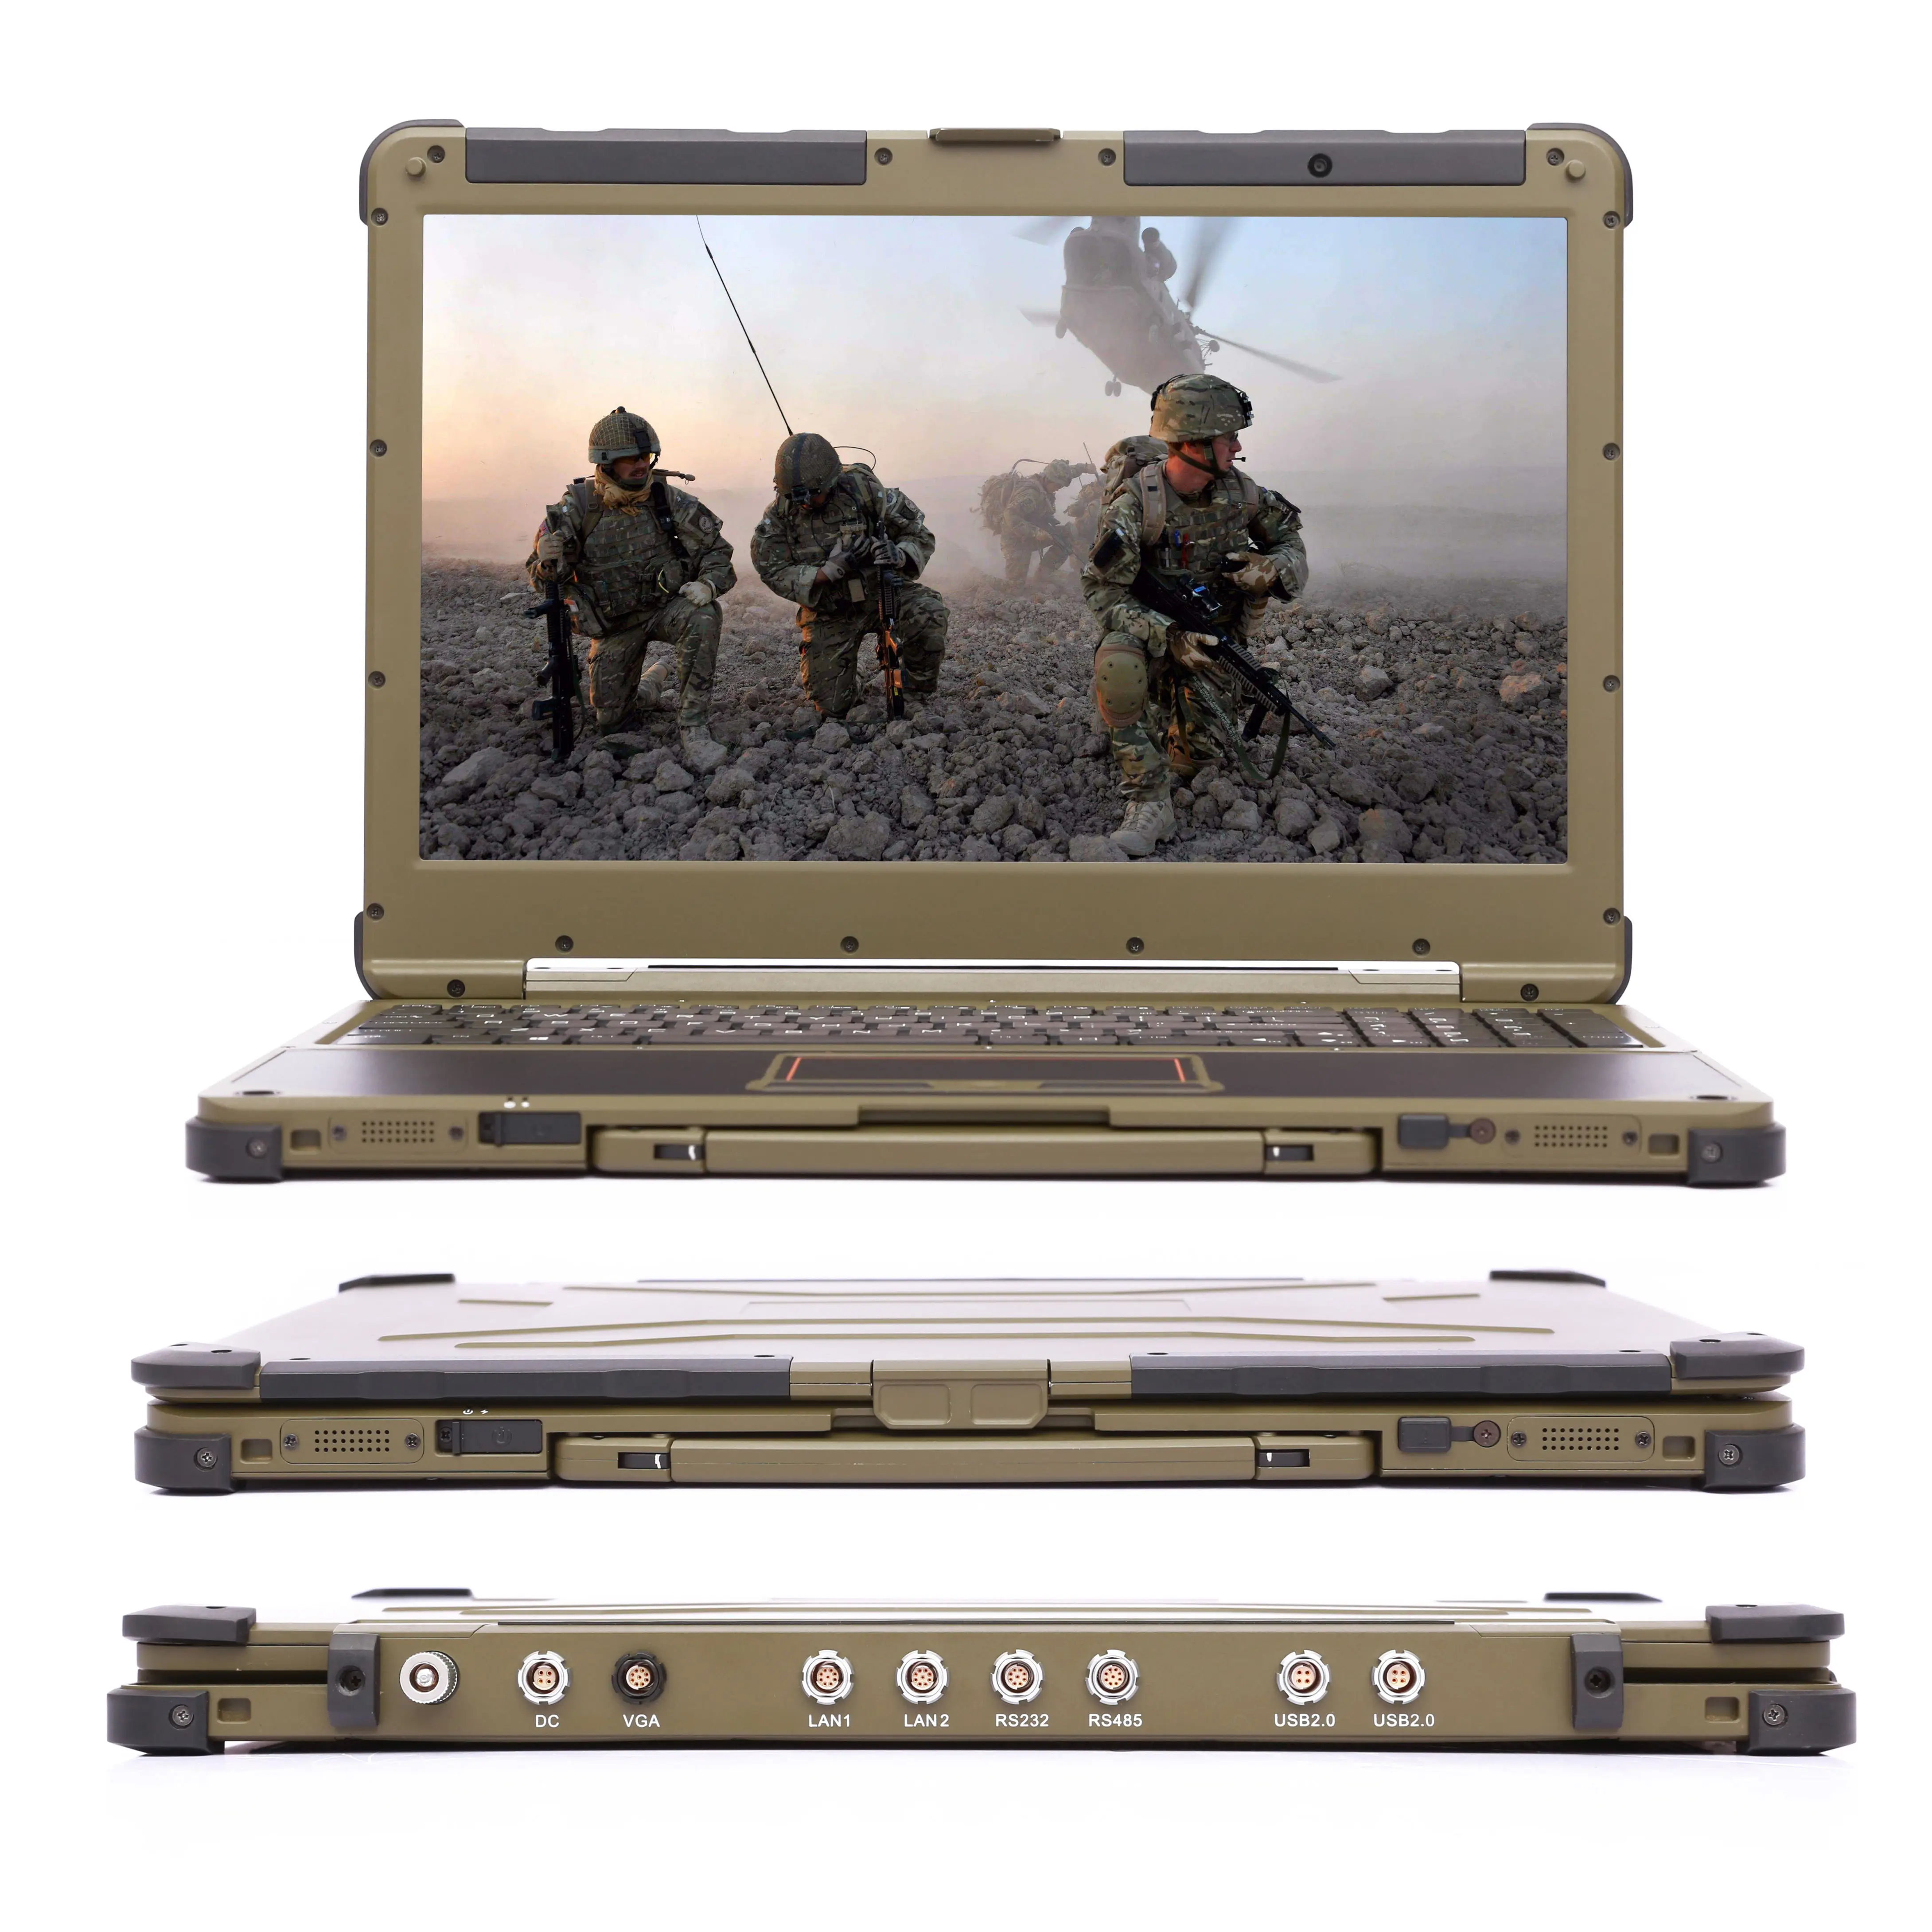 15.6 inch FHD 16:9 dustproof and waterproof 8G DDR4 M.2 SSD industrial tablet laptop rugged notebook i7-6500U CPU